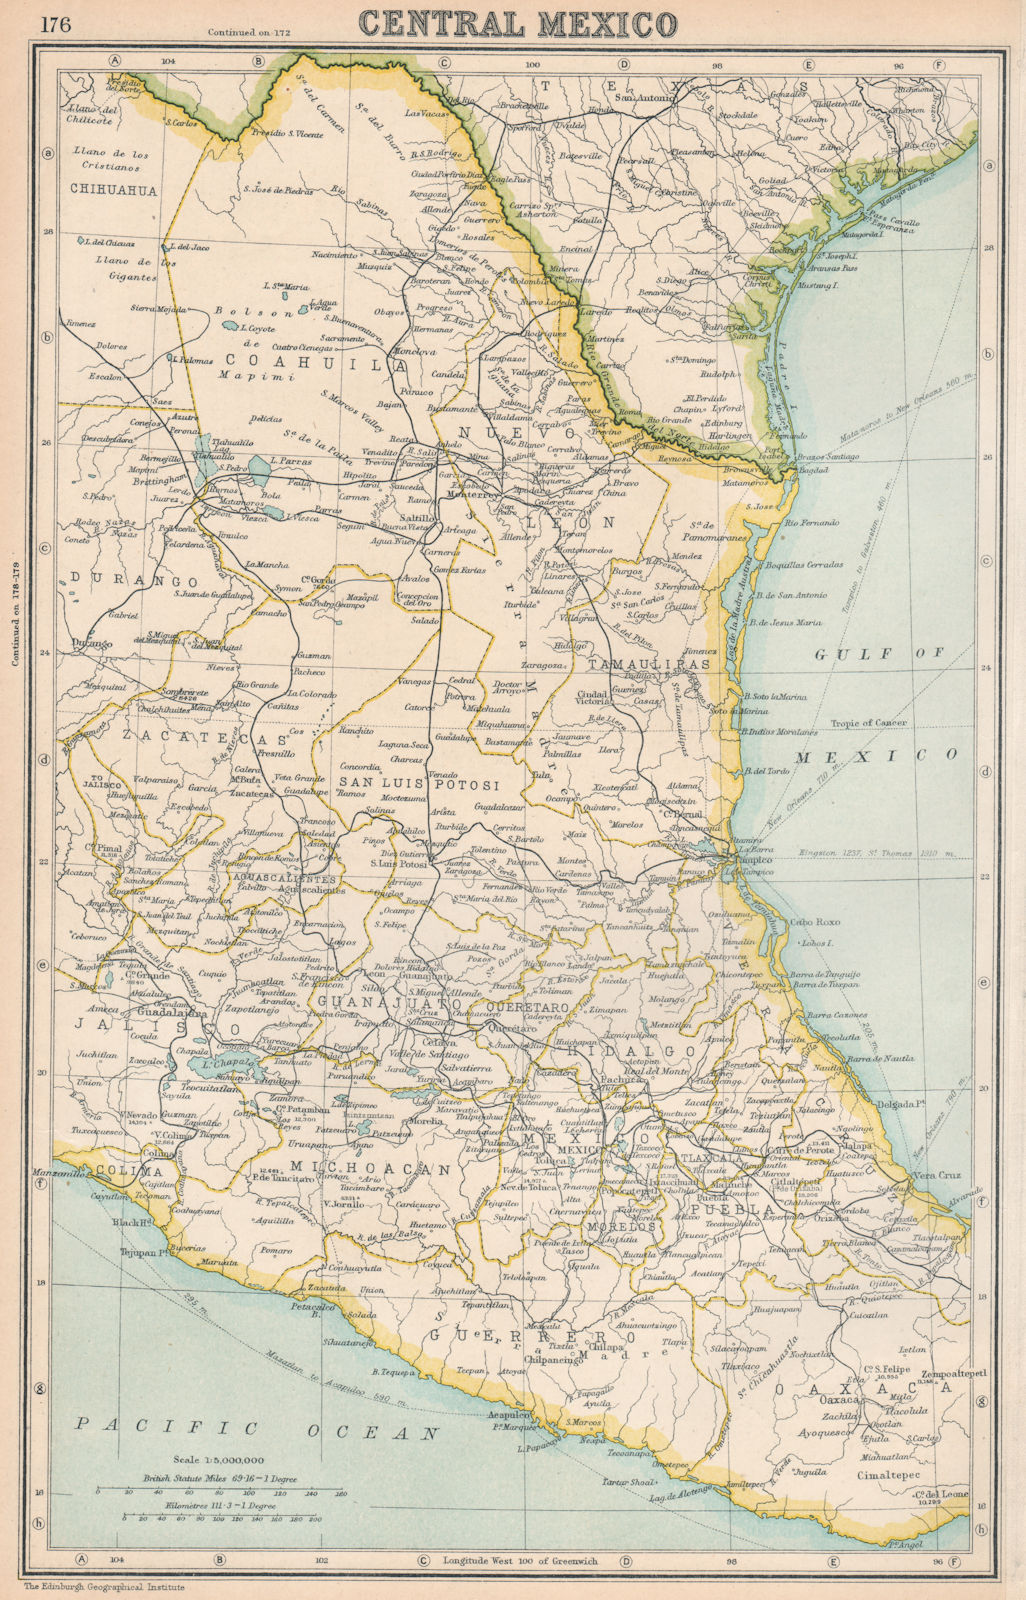 Associate Product MEXICO. Central Mexico showing states. BARTHOLOMEW 1924 old vintage map chart